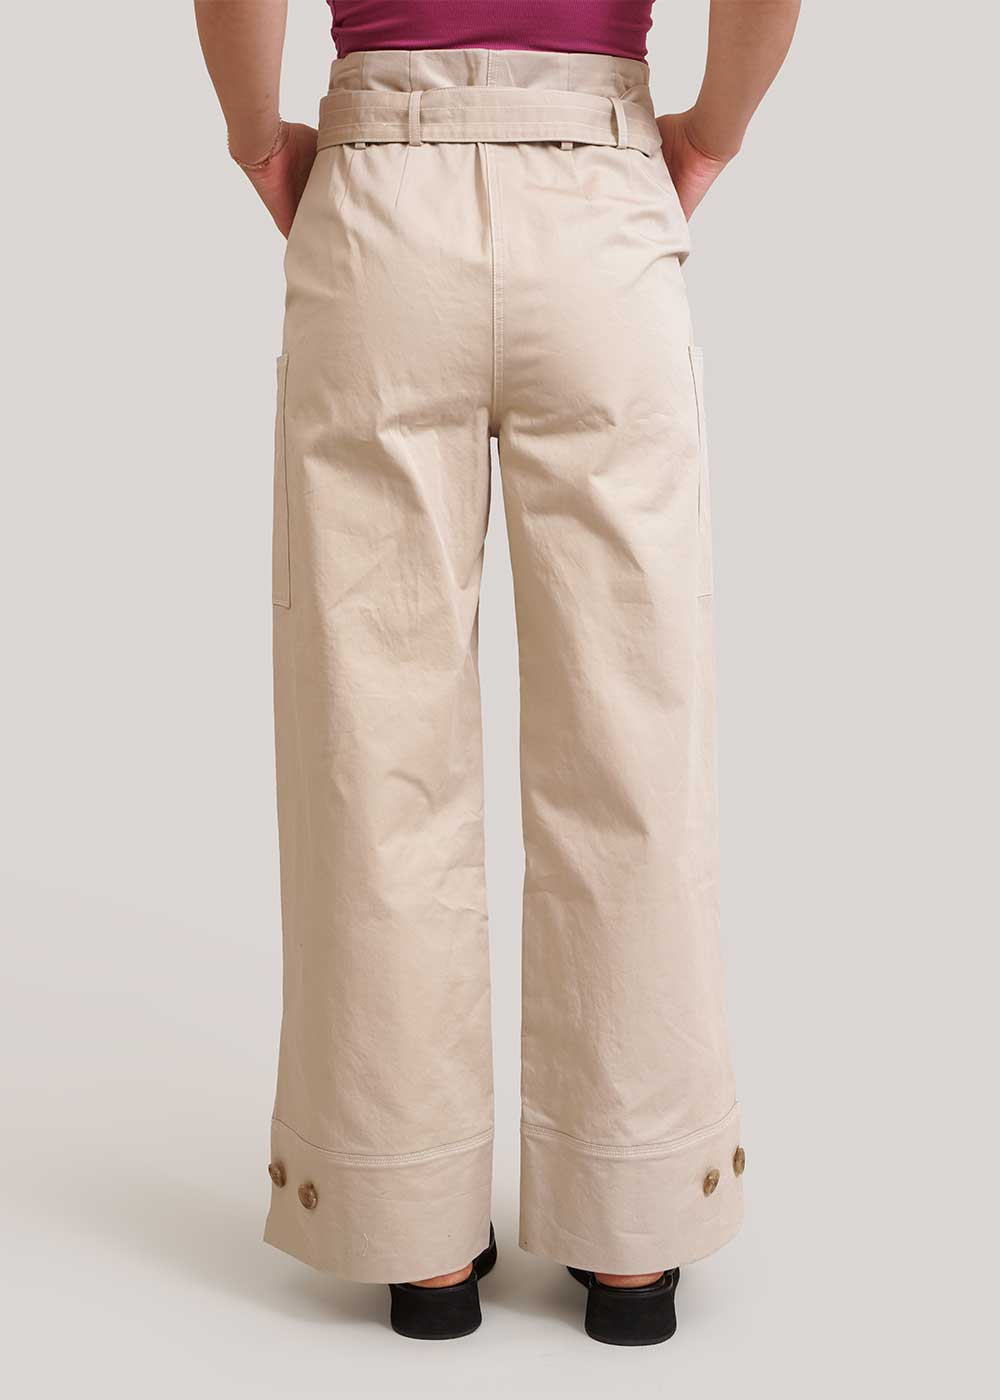 Geel Ecru Harper Belted Trousers - New Classics Studios Sustainable Ethical Fashion Canada